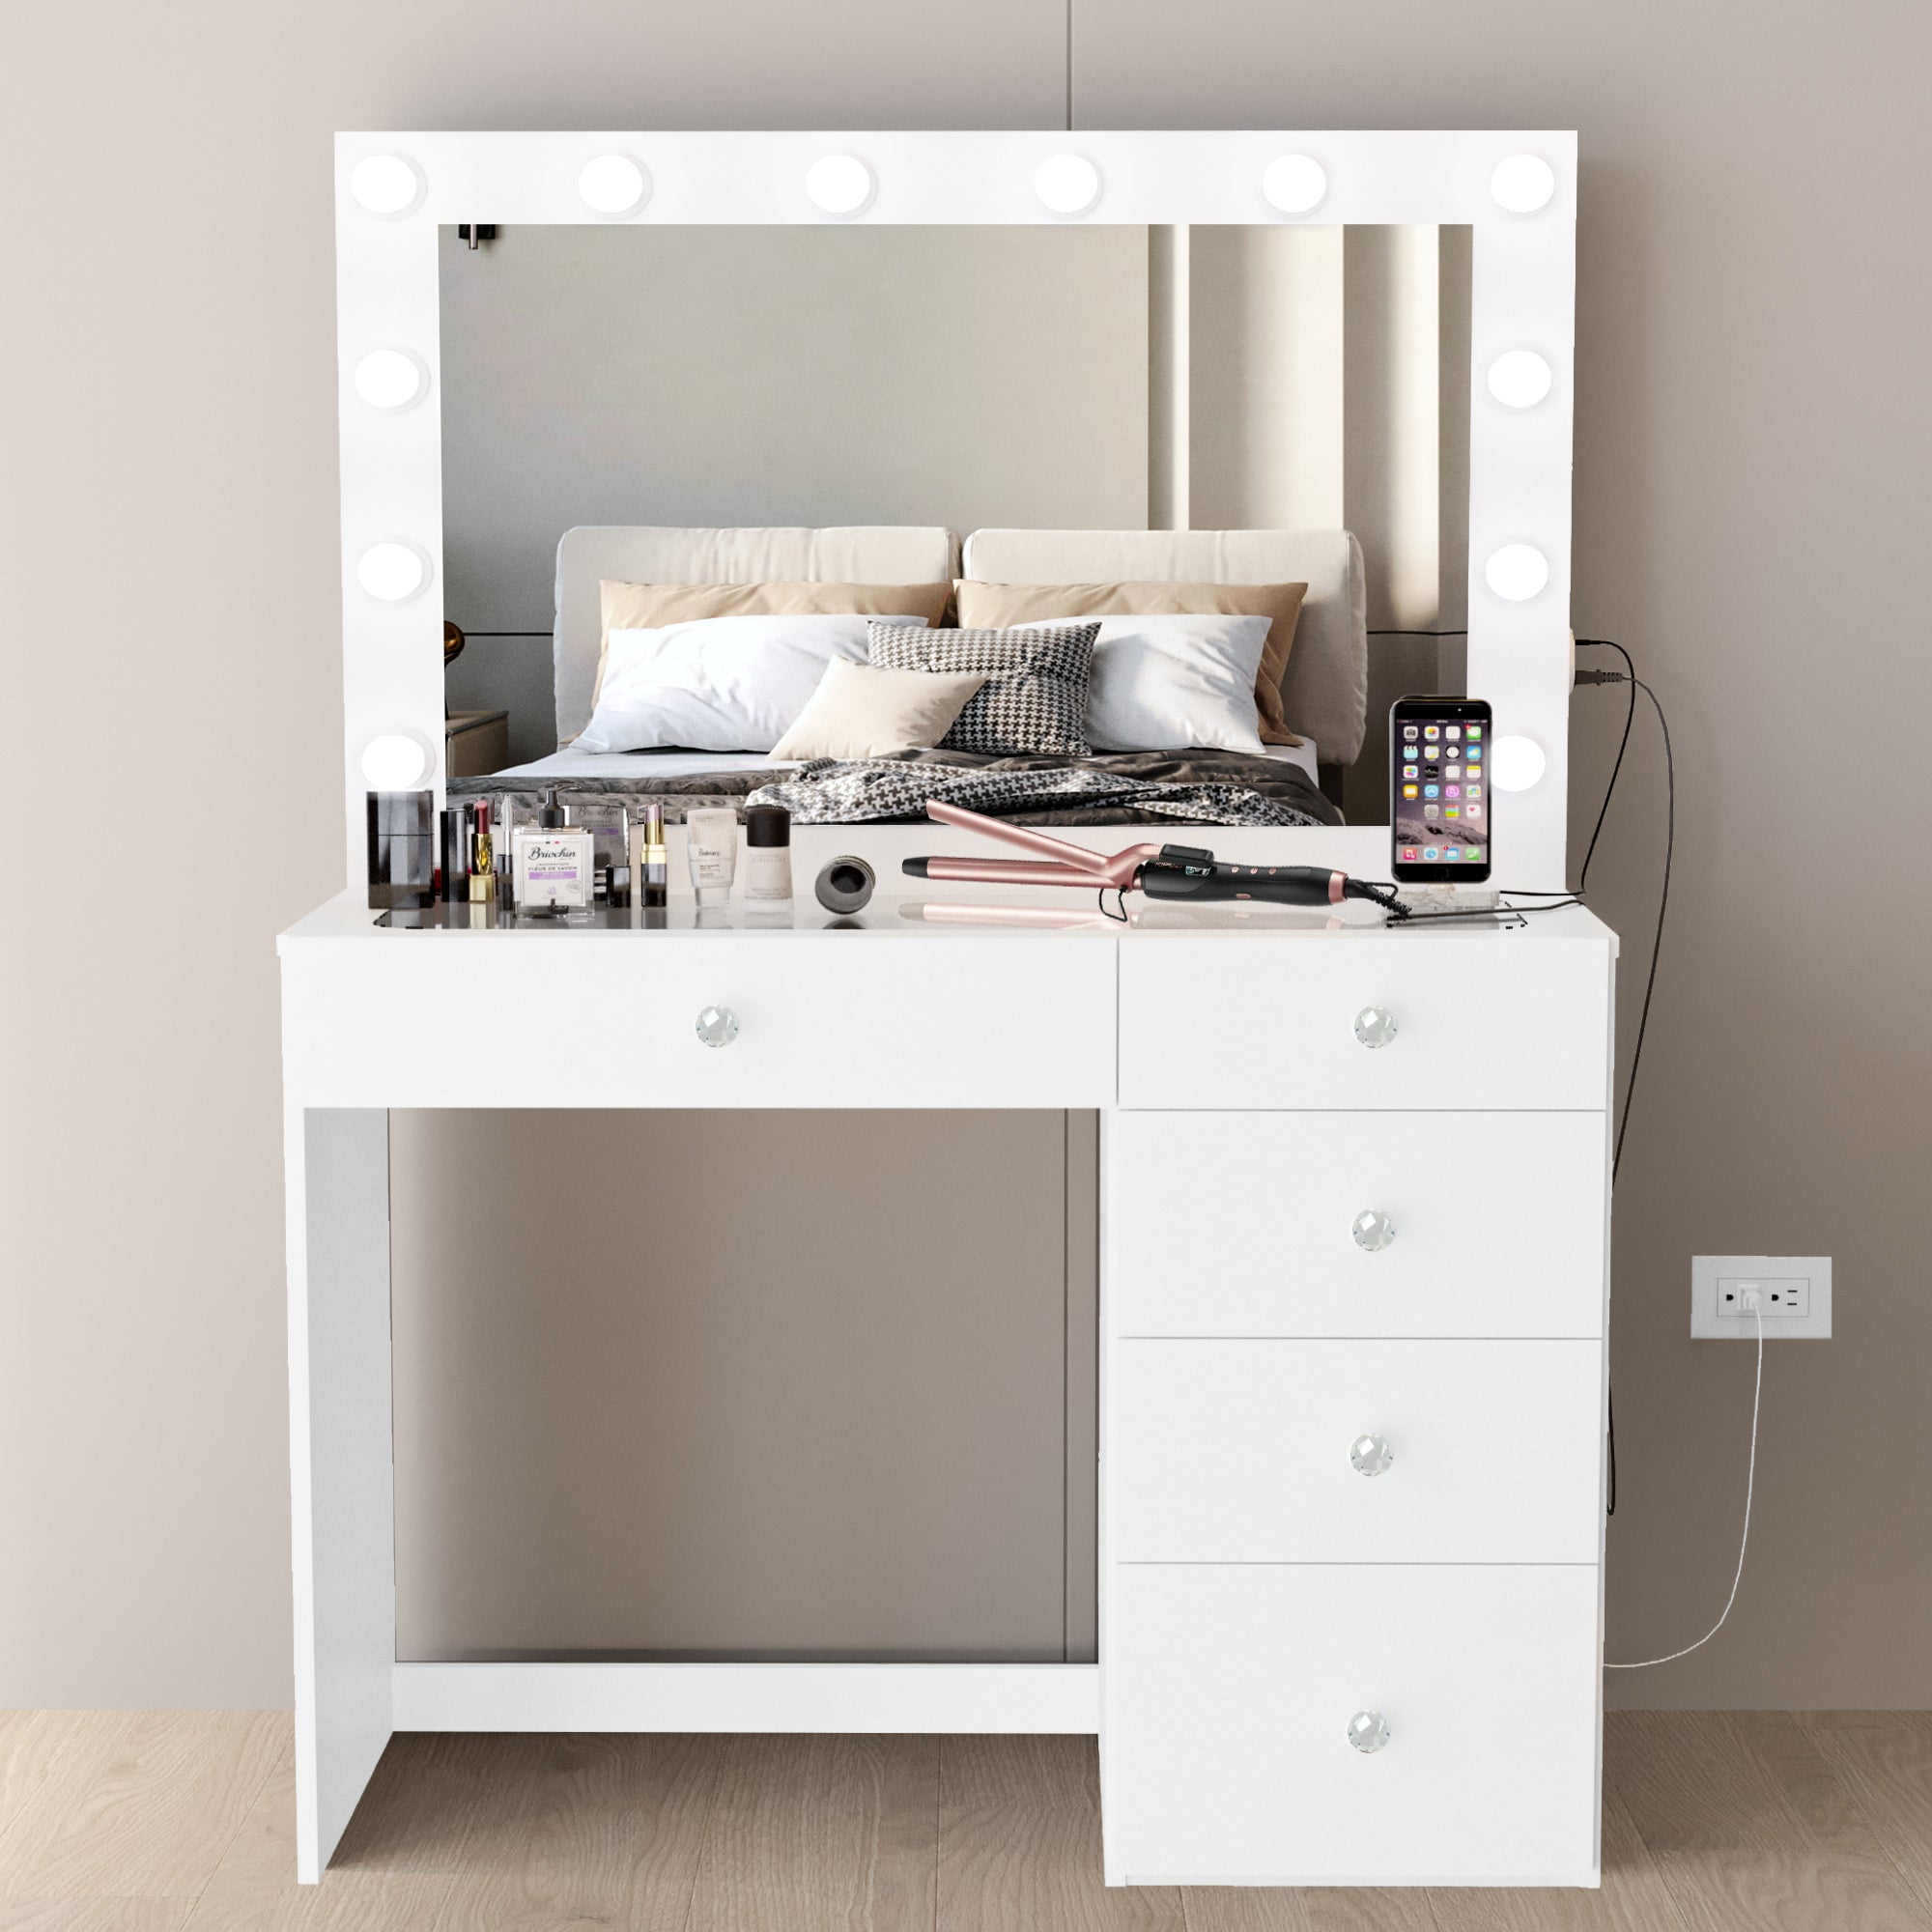 Boahaus Alana Black Vanity Desk with Mirror and Lights, Crystal Ball Knobs,  5 Drawers, White